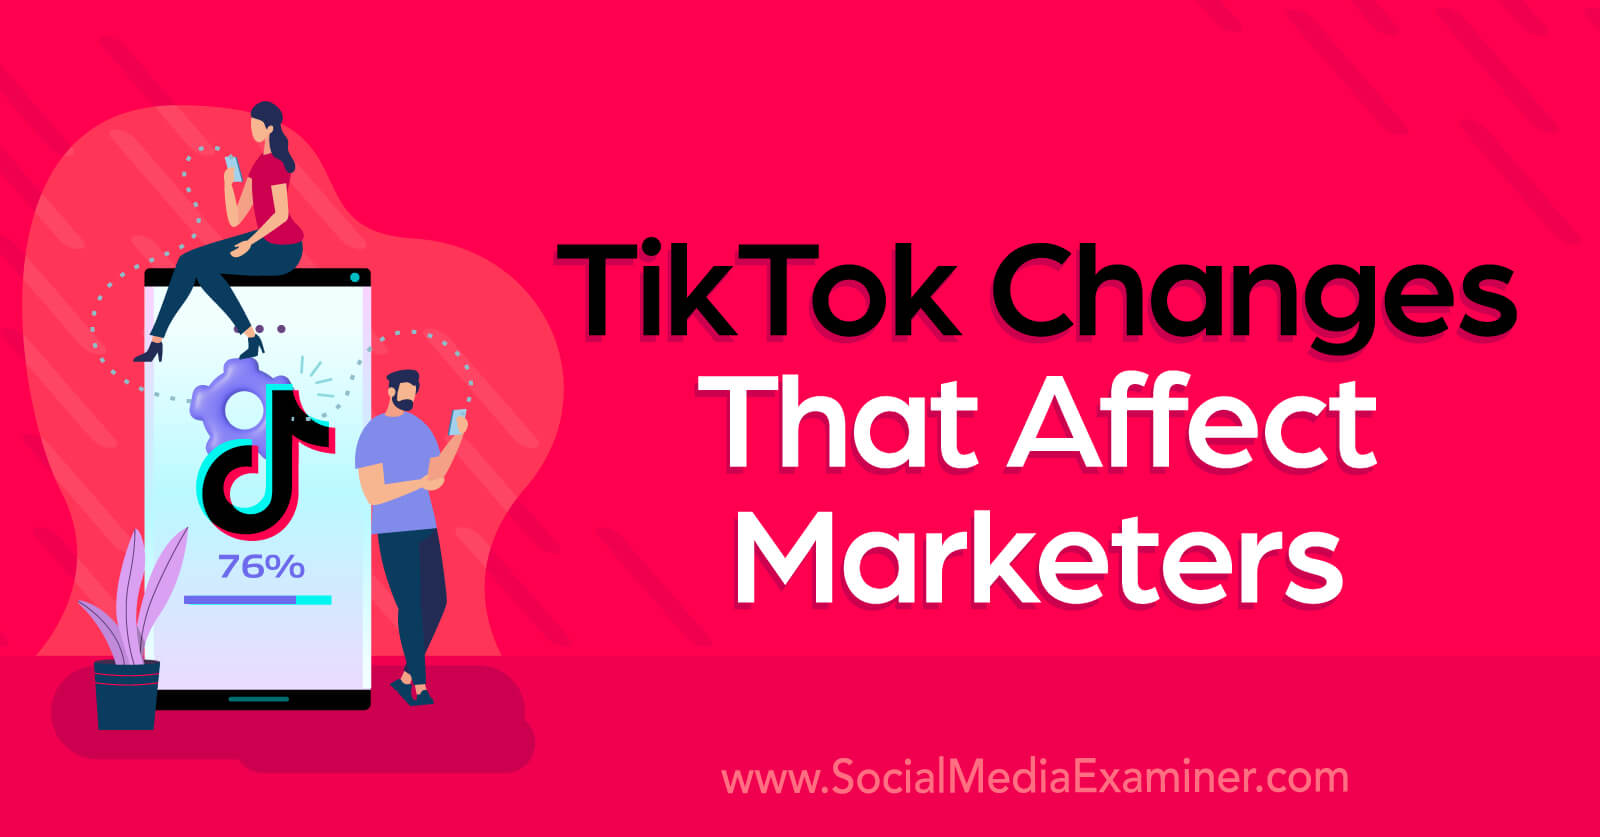 TikTok Changes That Affect Marketers by Social Media Examiner